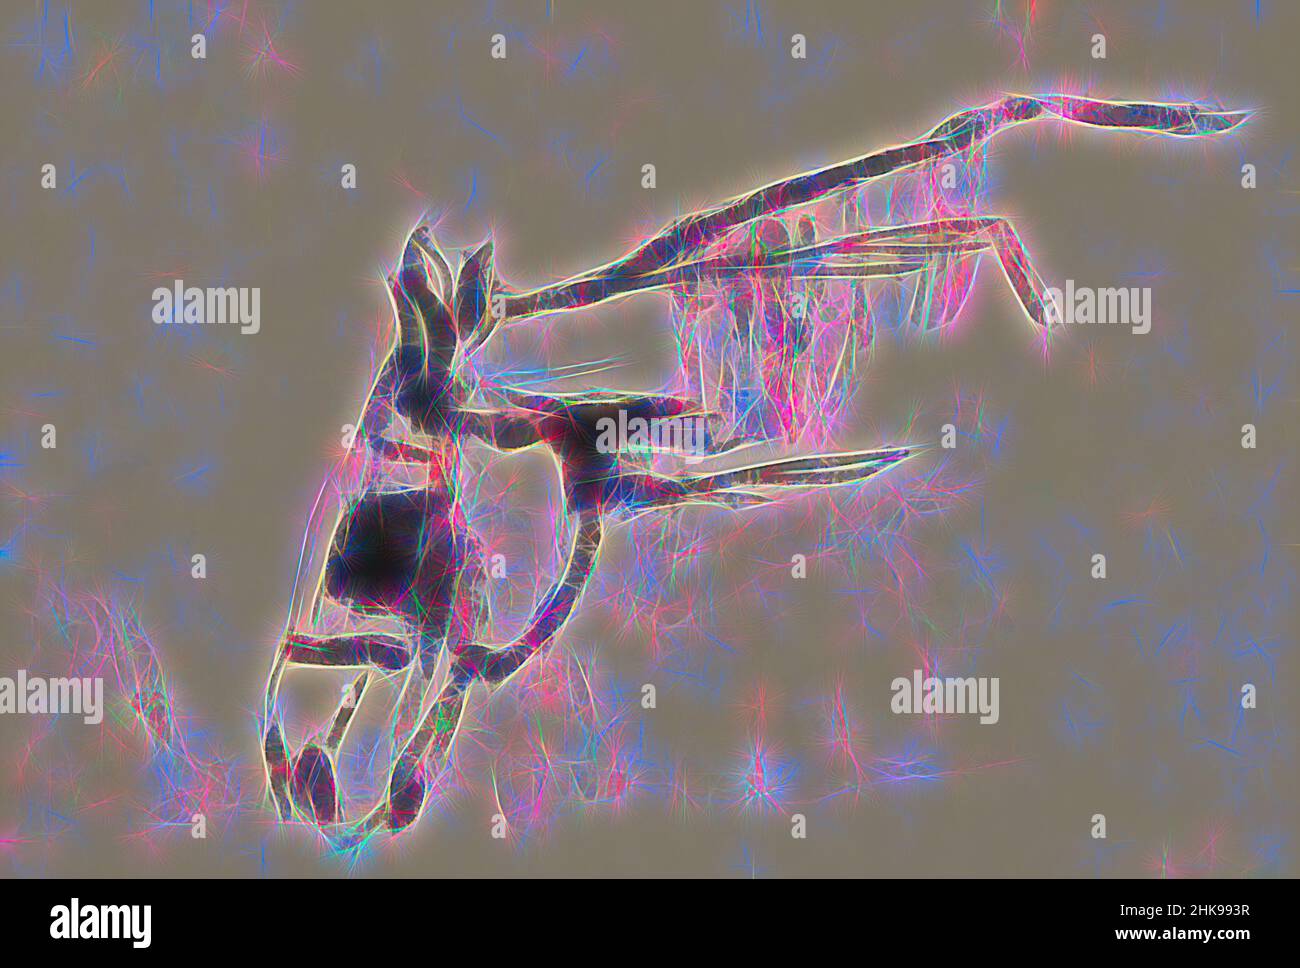 Inspired by Horse's head with blinders. Horse's head with eye-flaps, Reimagined by Artotop. Classic art reinvented with a modern twist. Design of warm cheerful glowing of brightness and light ray radiance. Photography inspired by surrealism and futurism, embracing dynamic energy of modern technology, movement, speed and revolutionize culture Stock Photo